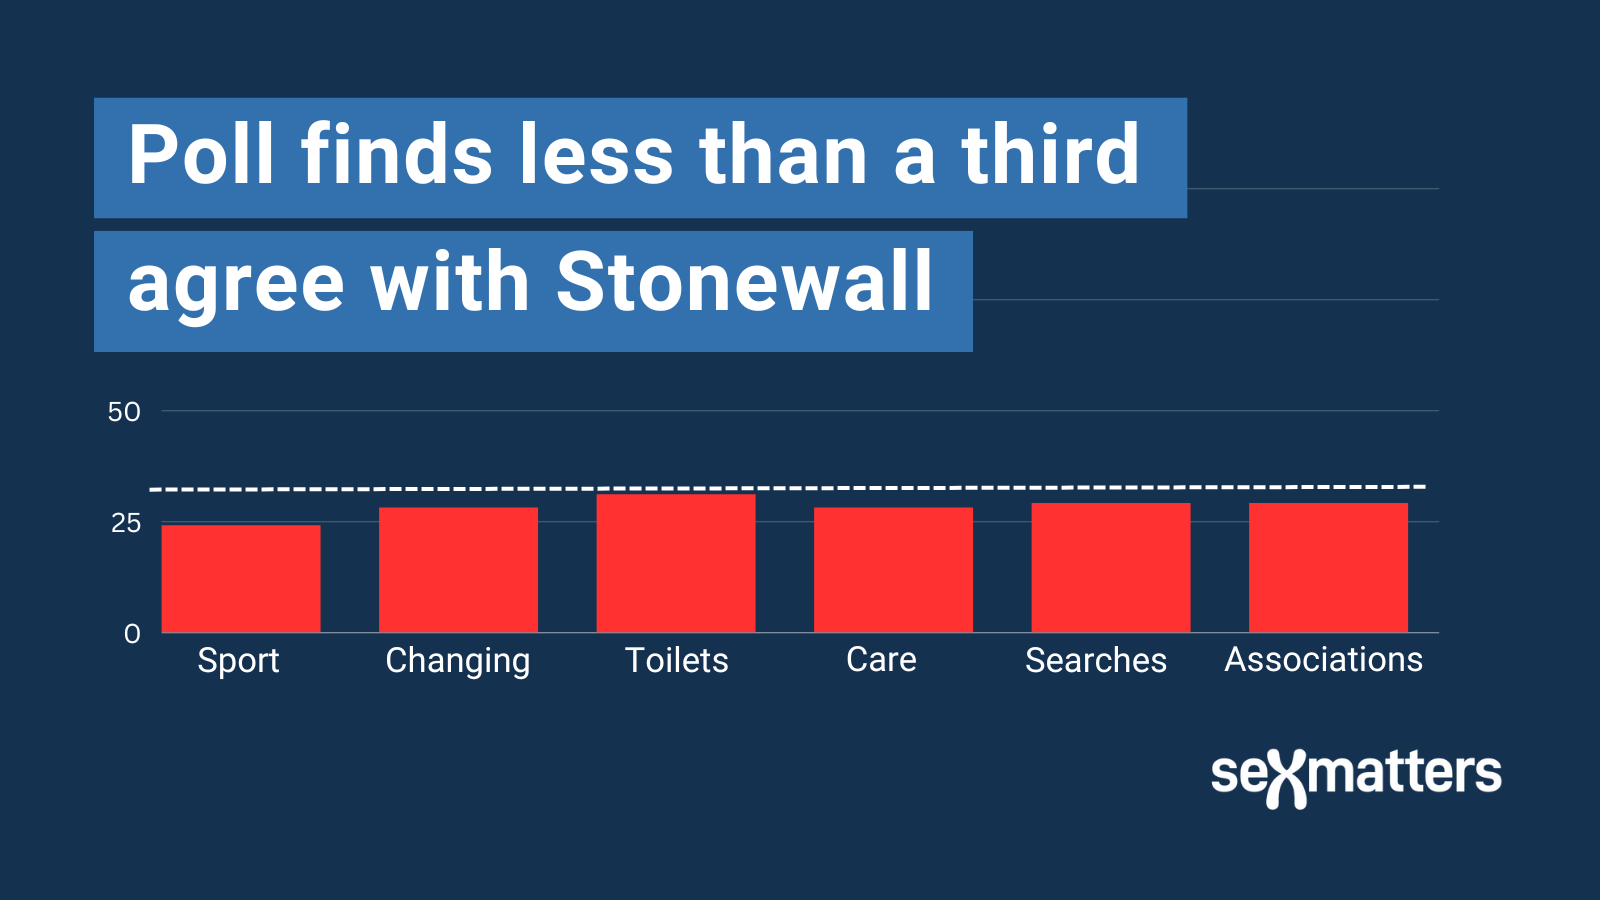 Poll finds less than a third agree with Stonewall